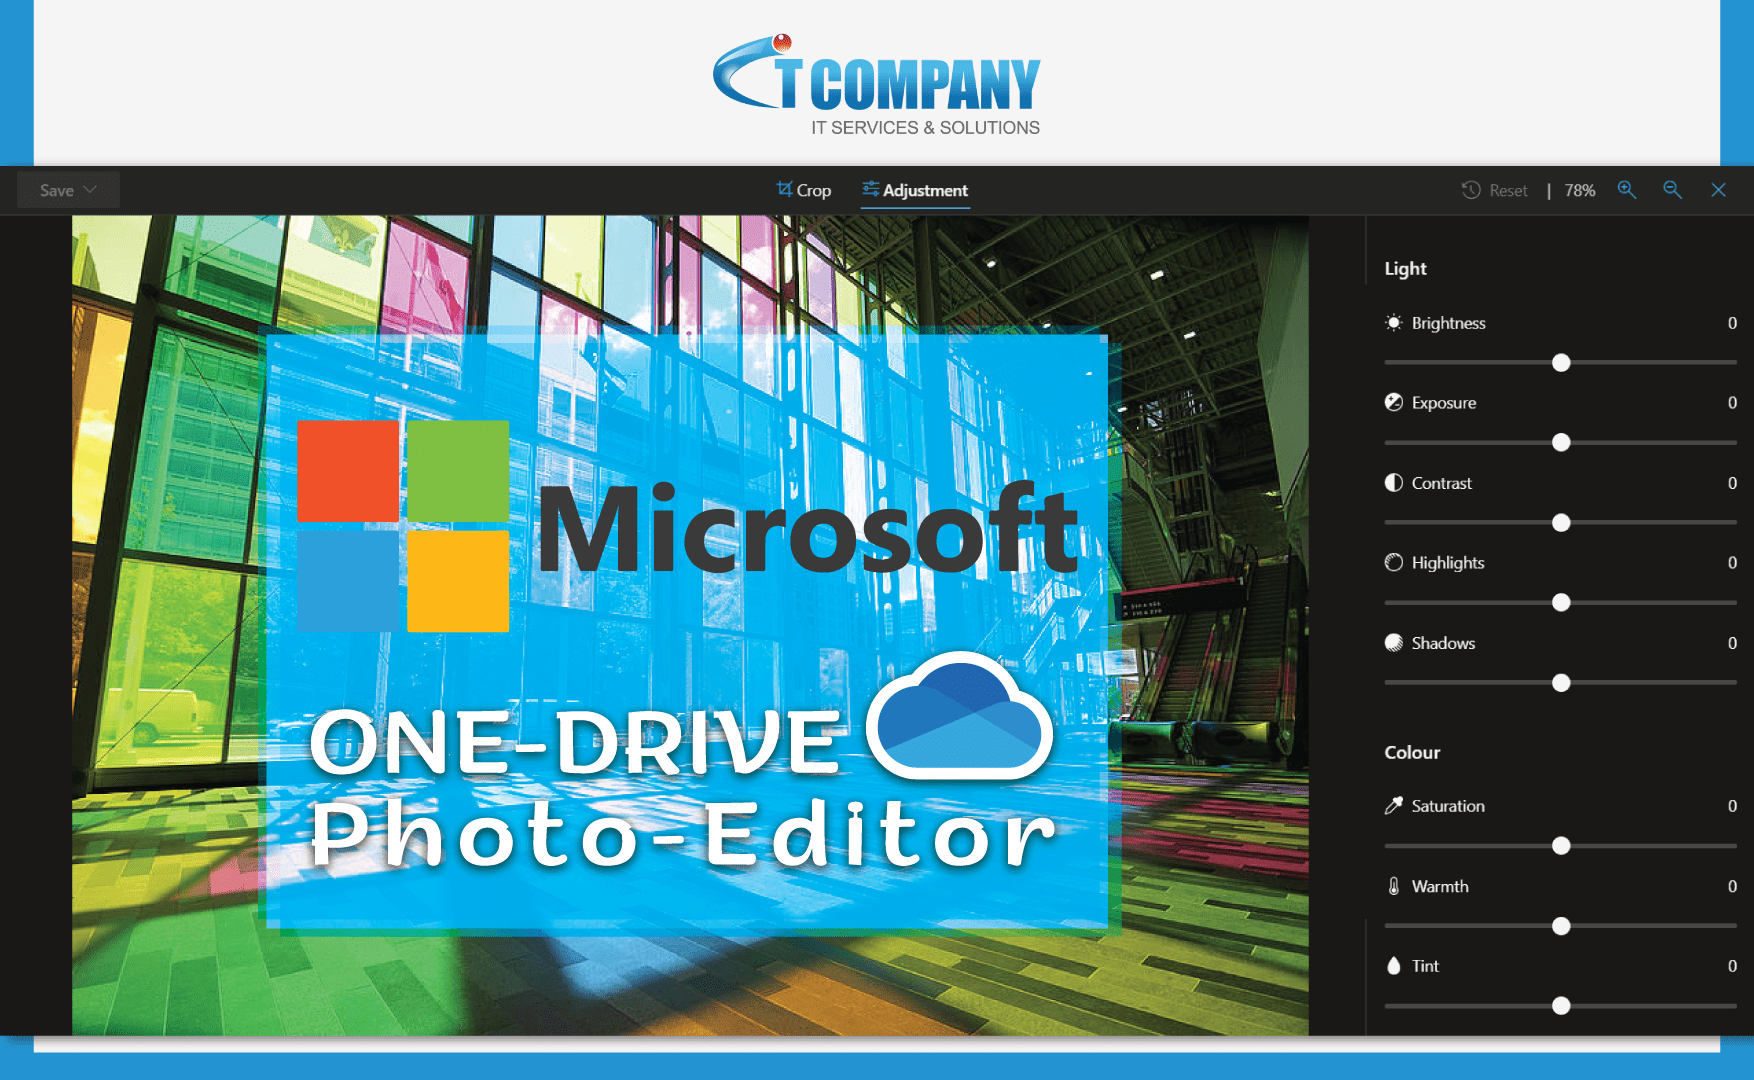 OneDrive now includes picture editing tools from Microsoft